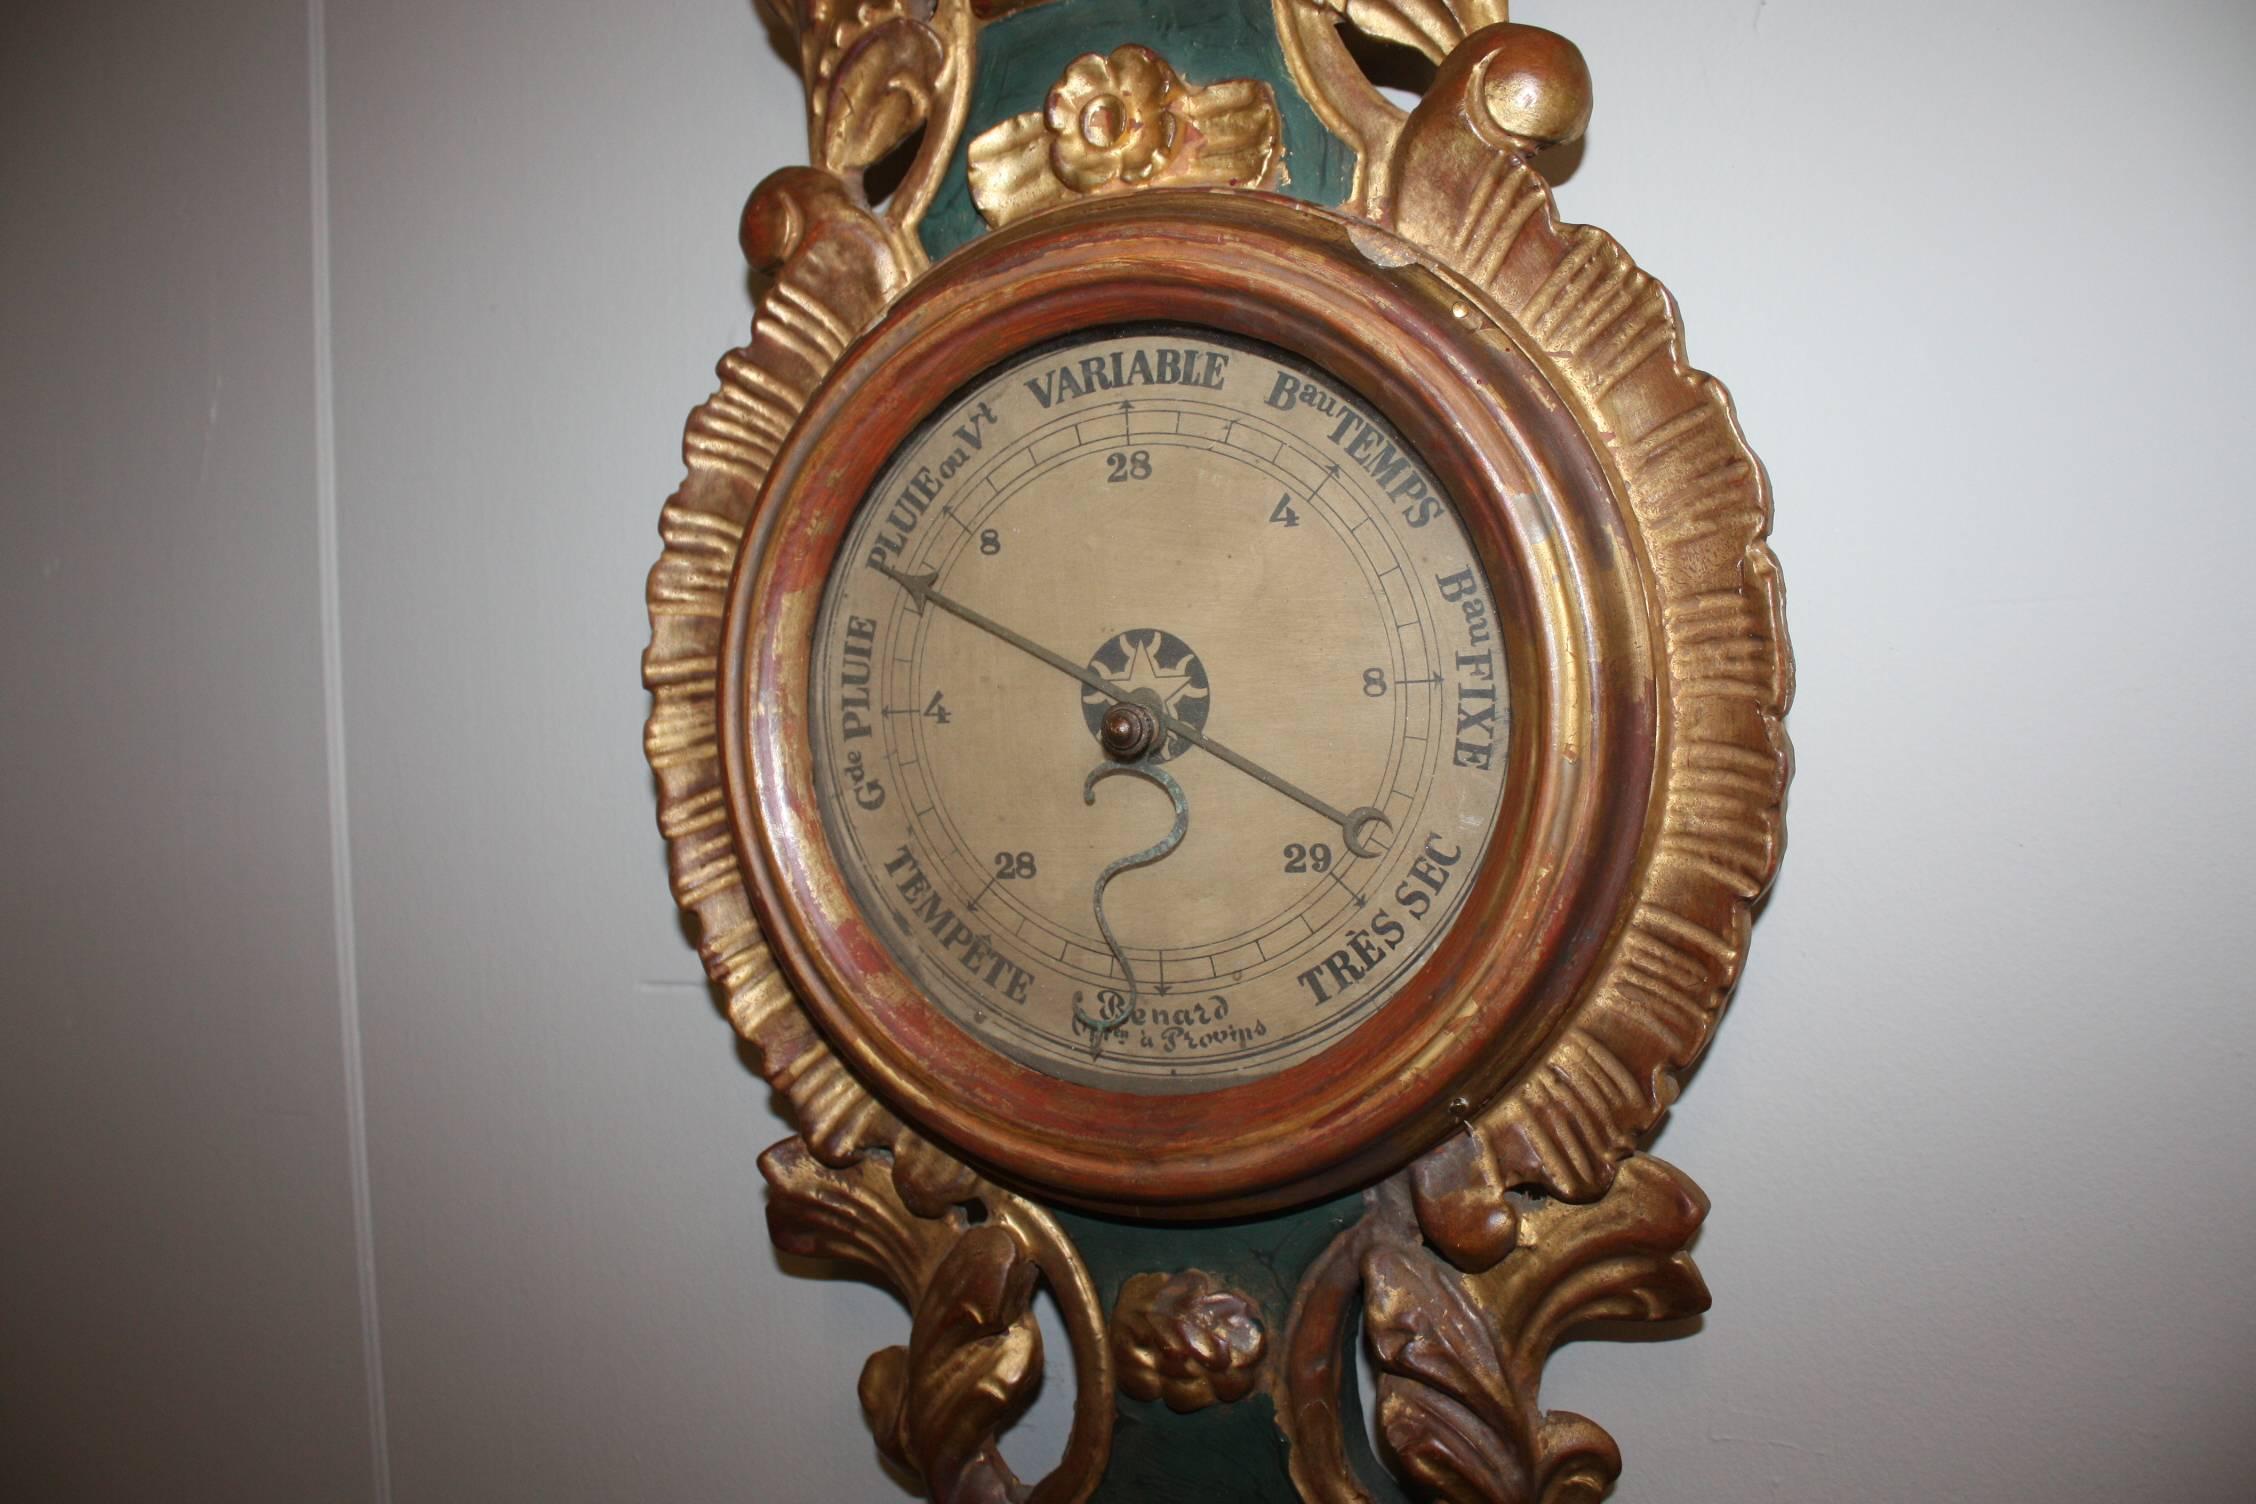 This French Louis XVI style barometer and thermometer features an exquisite carved giltwood crest with delicate foliage motifs. Below the crest, the thermometer, encompassed in a green painted body, sits atop the round barometer. This French